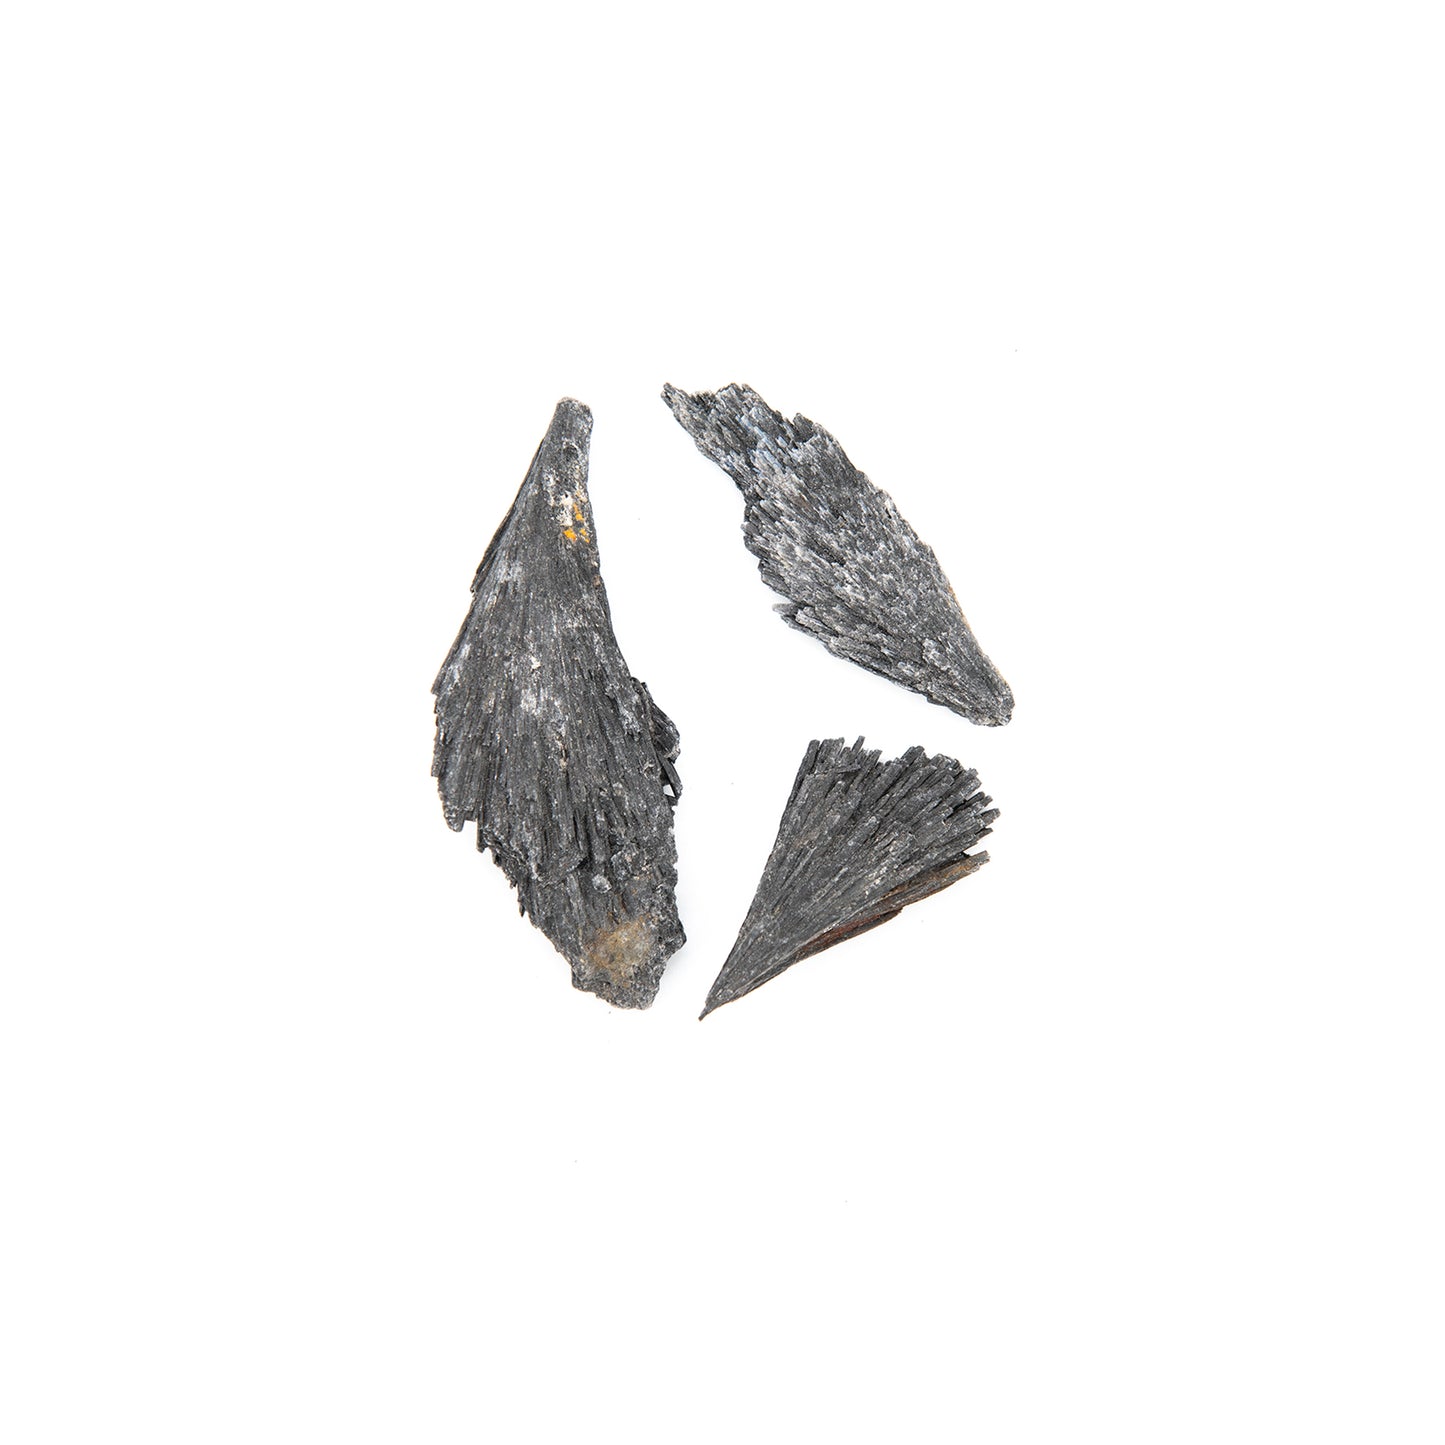 Black Kyanite Crystal Sprays. Nice shape and hue in these black Kyanite crystal sprays. Said to be a stone of protection. The sizes are around 2 inches with some 3 inches.